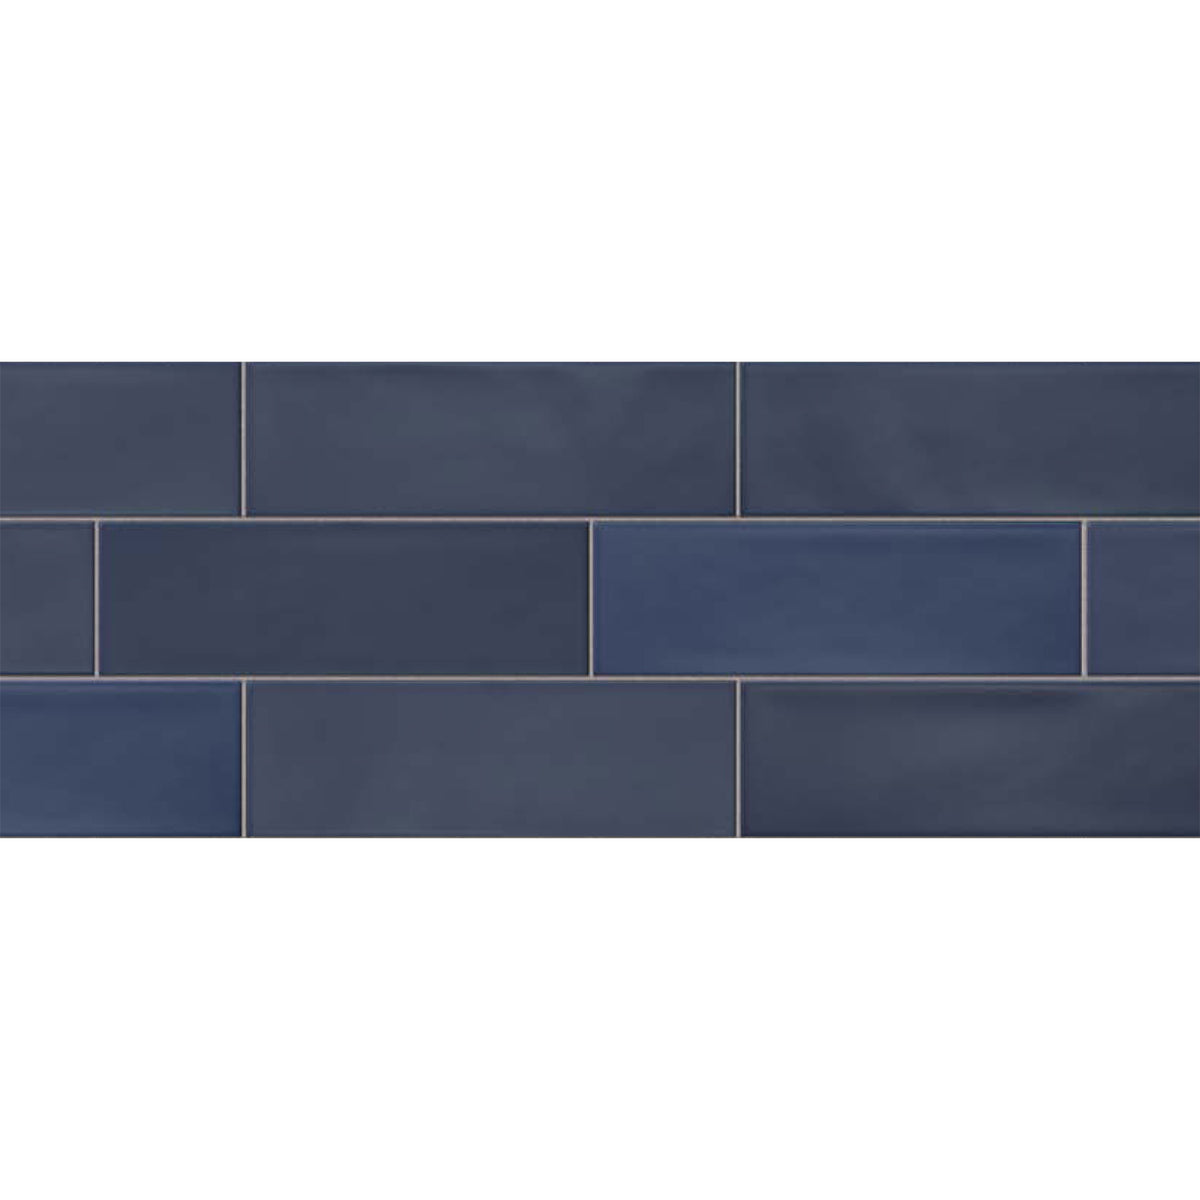 Topcu - Chalky - 2.5 in. x 8 in. Ceramic Wall Tile - Deep Blue Installed